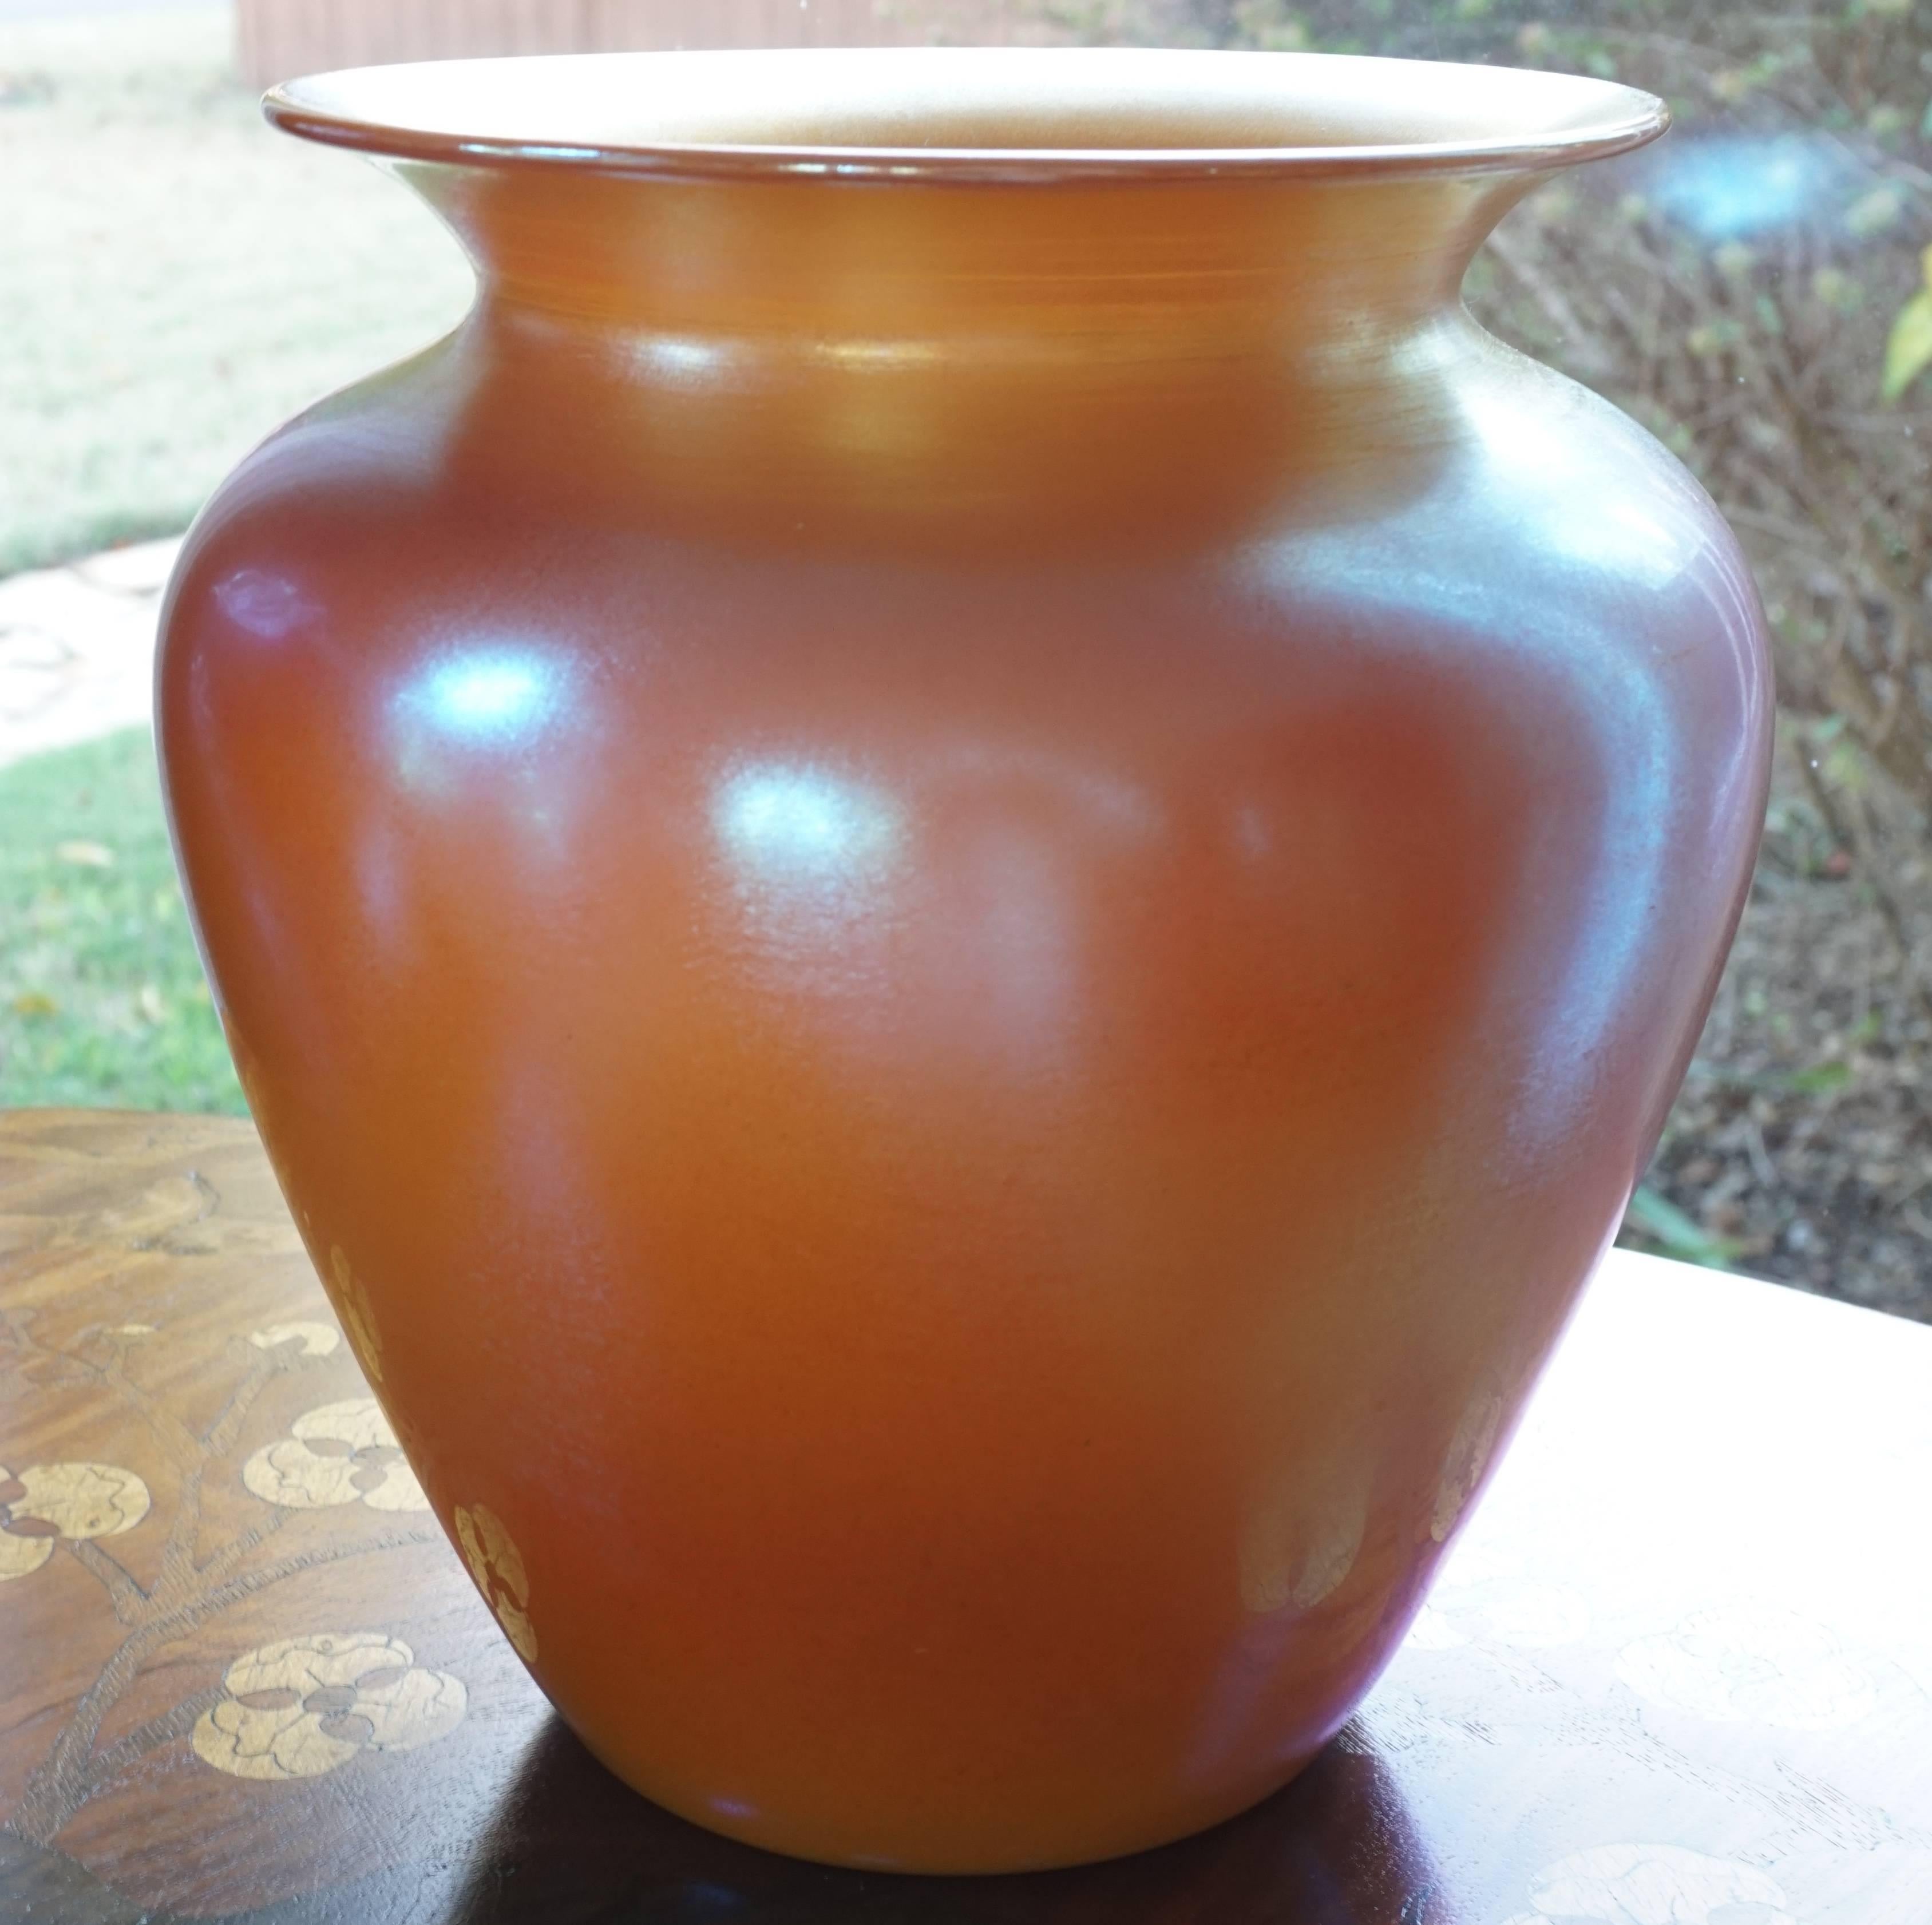 Durand Iridescent orange gold glass vase. With large beautiful proportions; this vase adds color and warmth to an important space. Perfect for that special gift!

circa 1925. 

Enameled on Pontic: DURAND, 1716, 8

Height. 8.75 Inches.
Width: 8